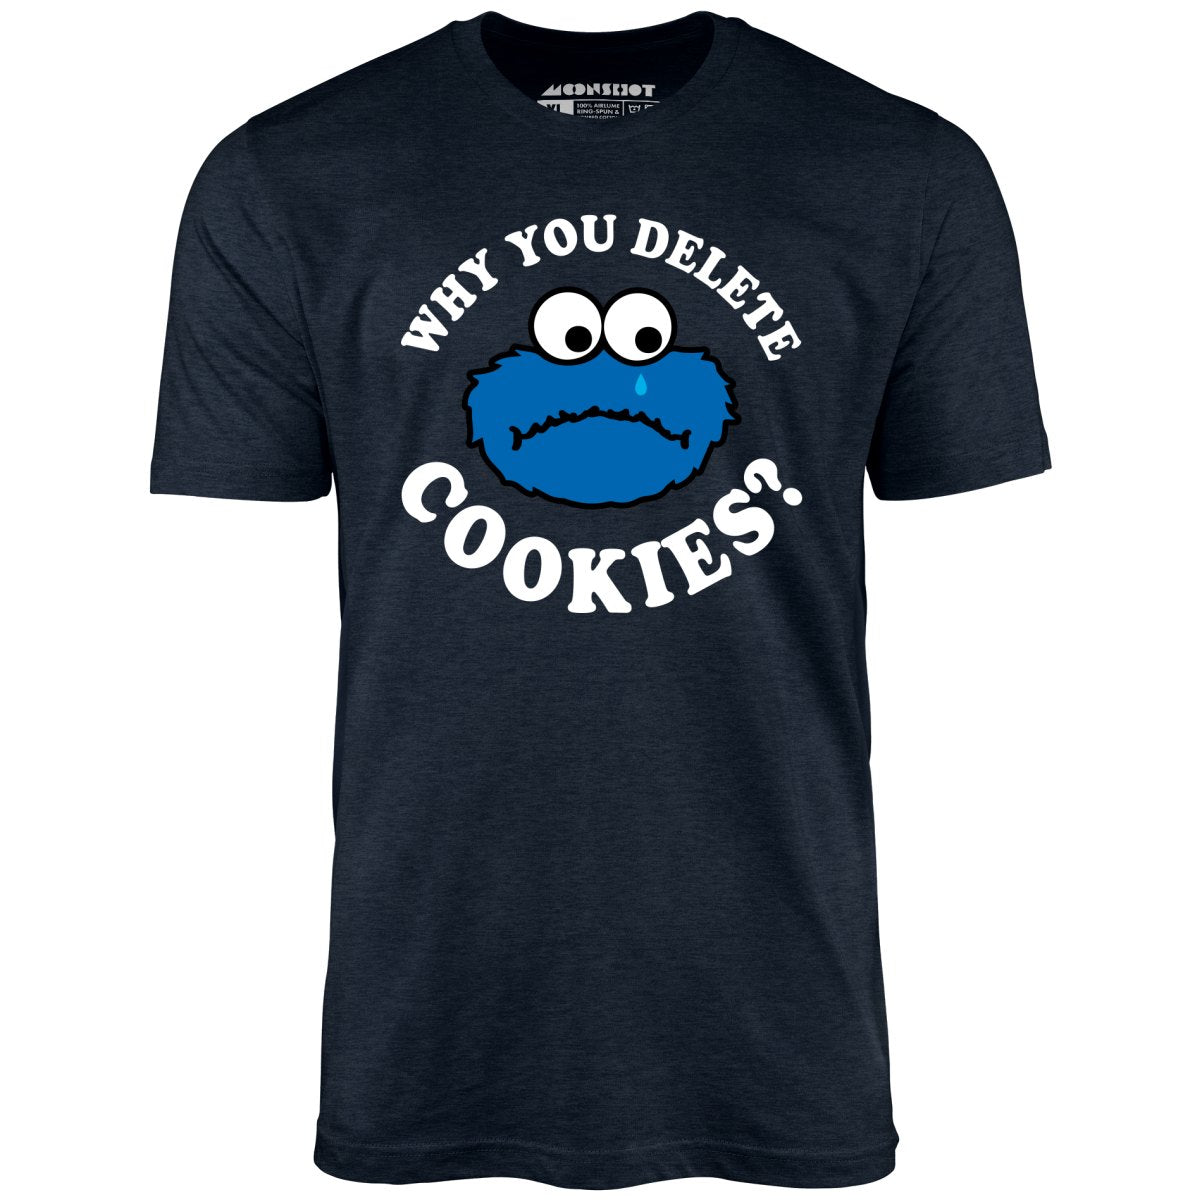 Why You Delete Cookies? - Unisex T-Shirt